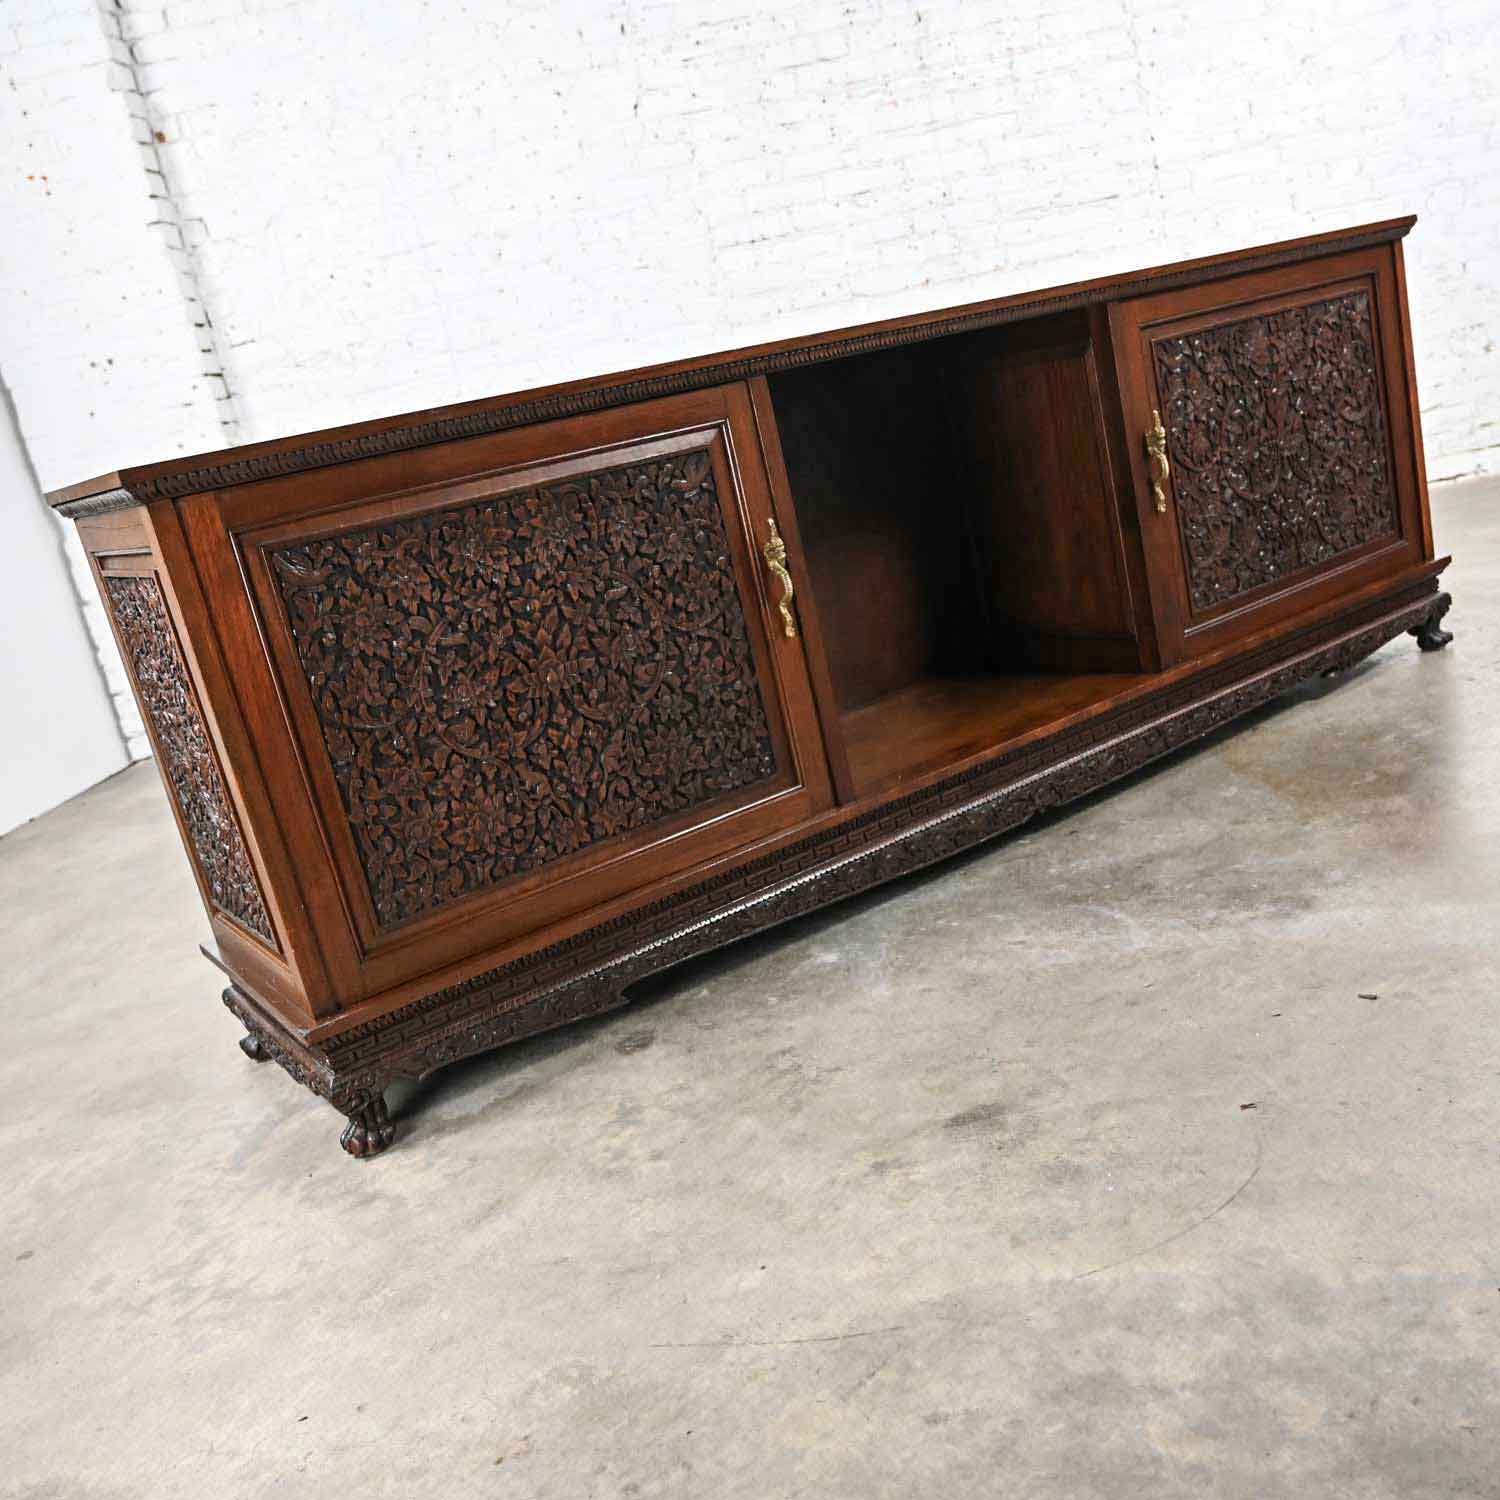 Vintage Chinoiserie Hand Carved Rosewood Credenza Buffet Cabinet from Bangkok Thailand